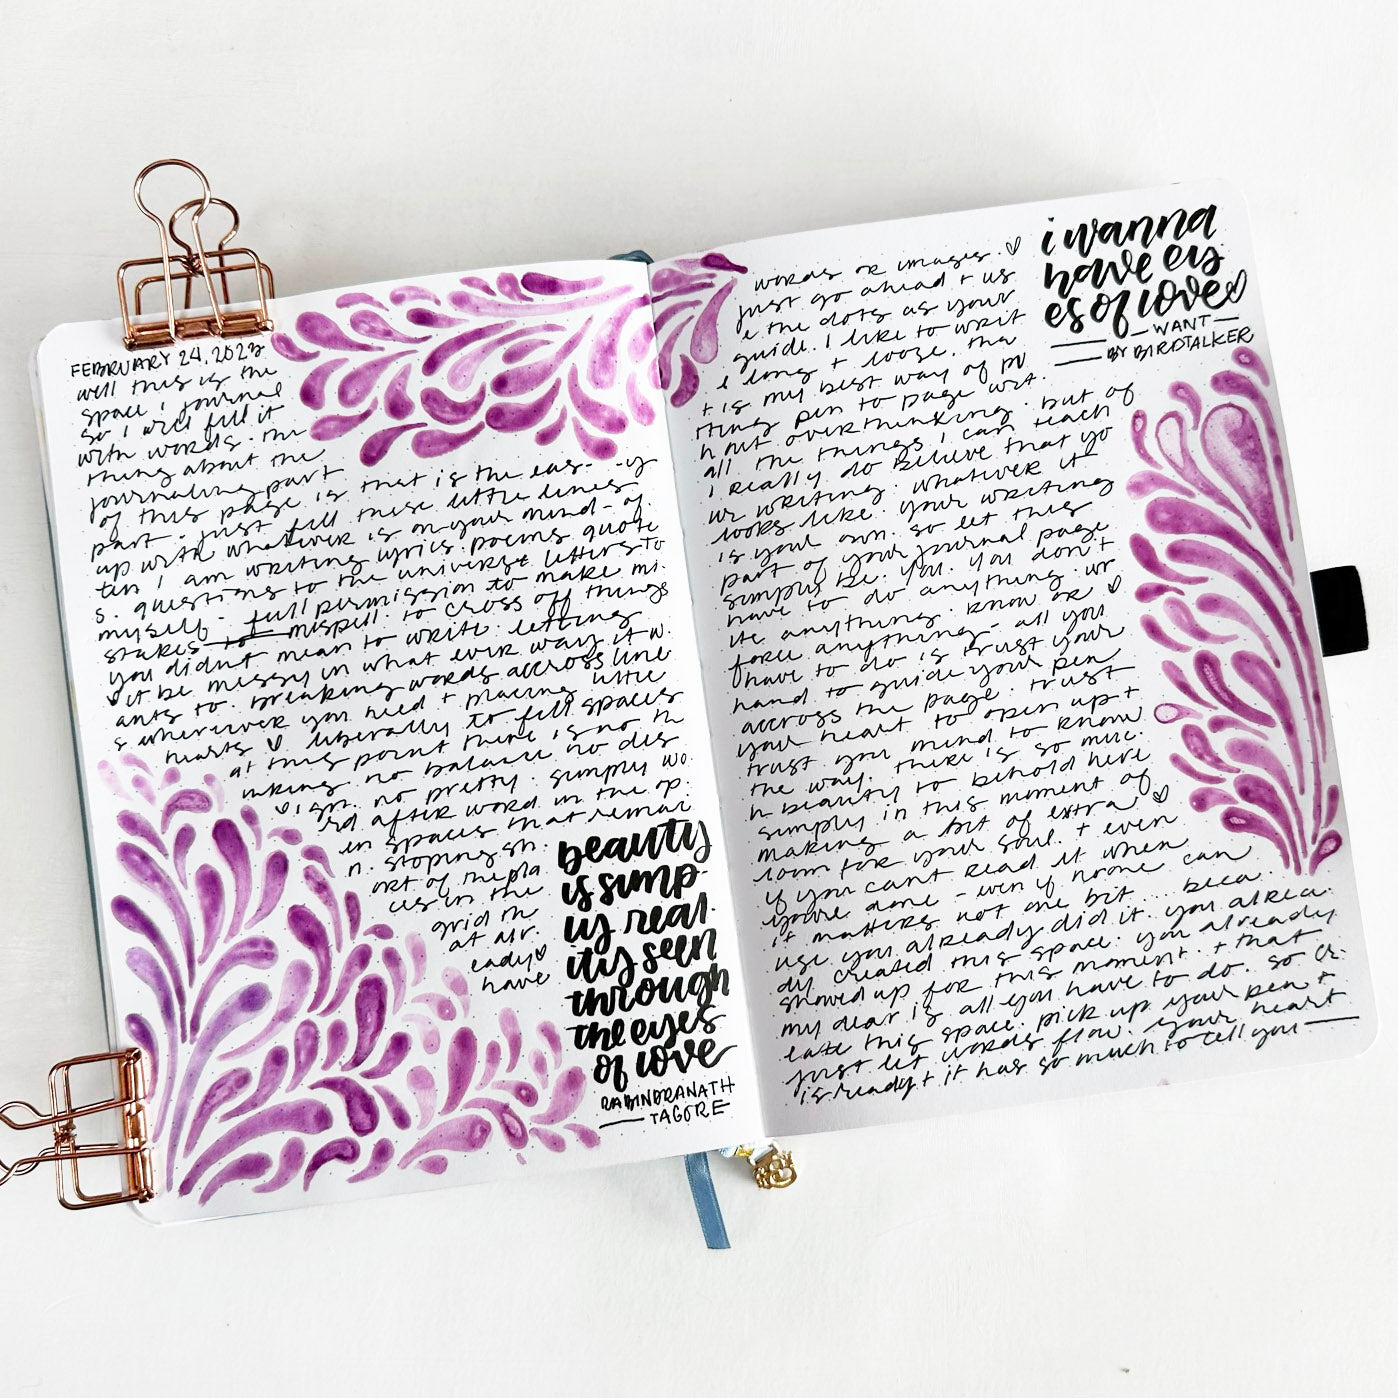 Creative Art Journal Page Ideas Using Watercolors - Behind the Designs